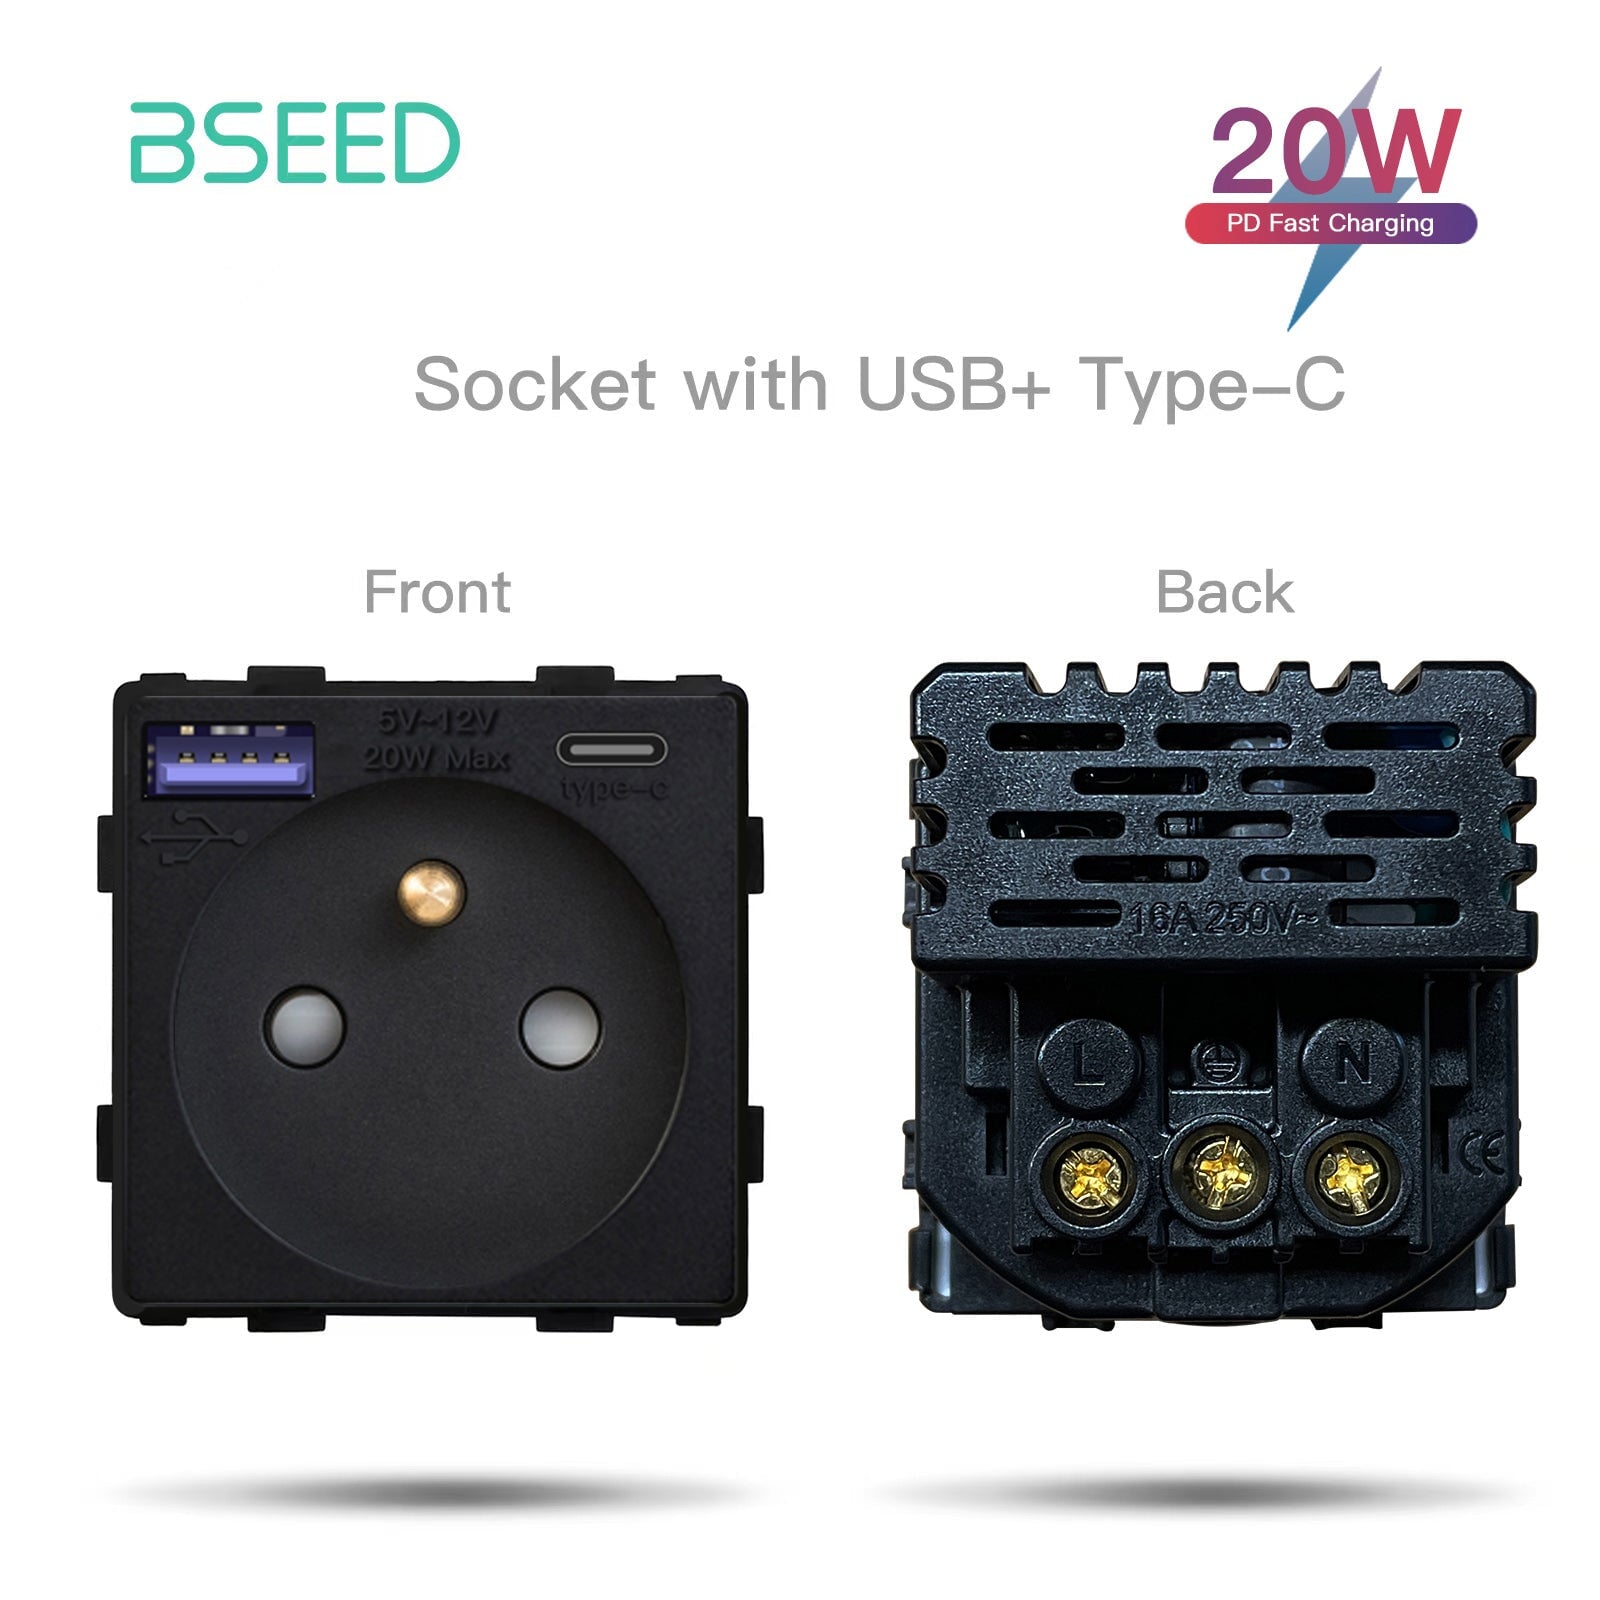 BSEED French Type-C Interface Outlet Wall Socket 16A USB Charge Power Outlets & Sockets Bseedswitch Black 20W 